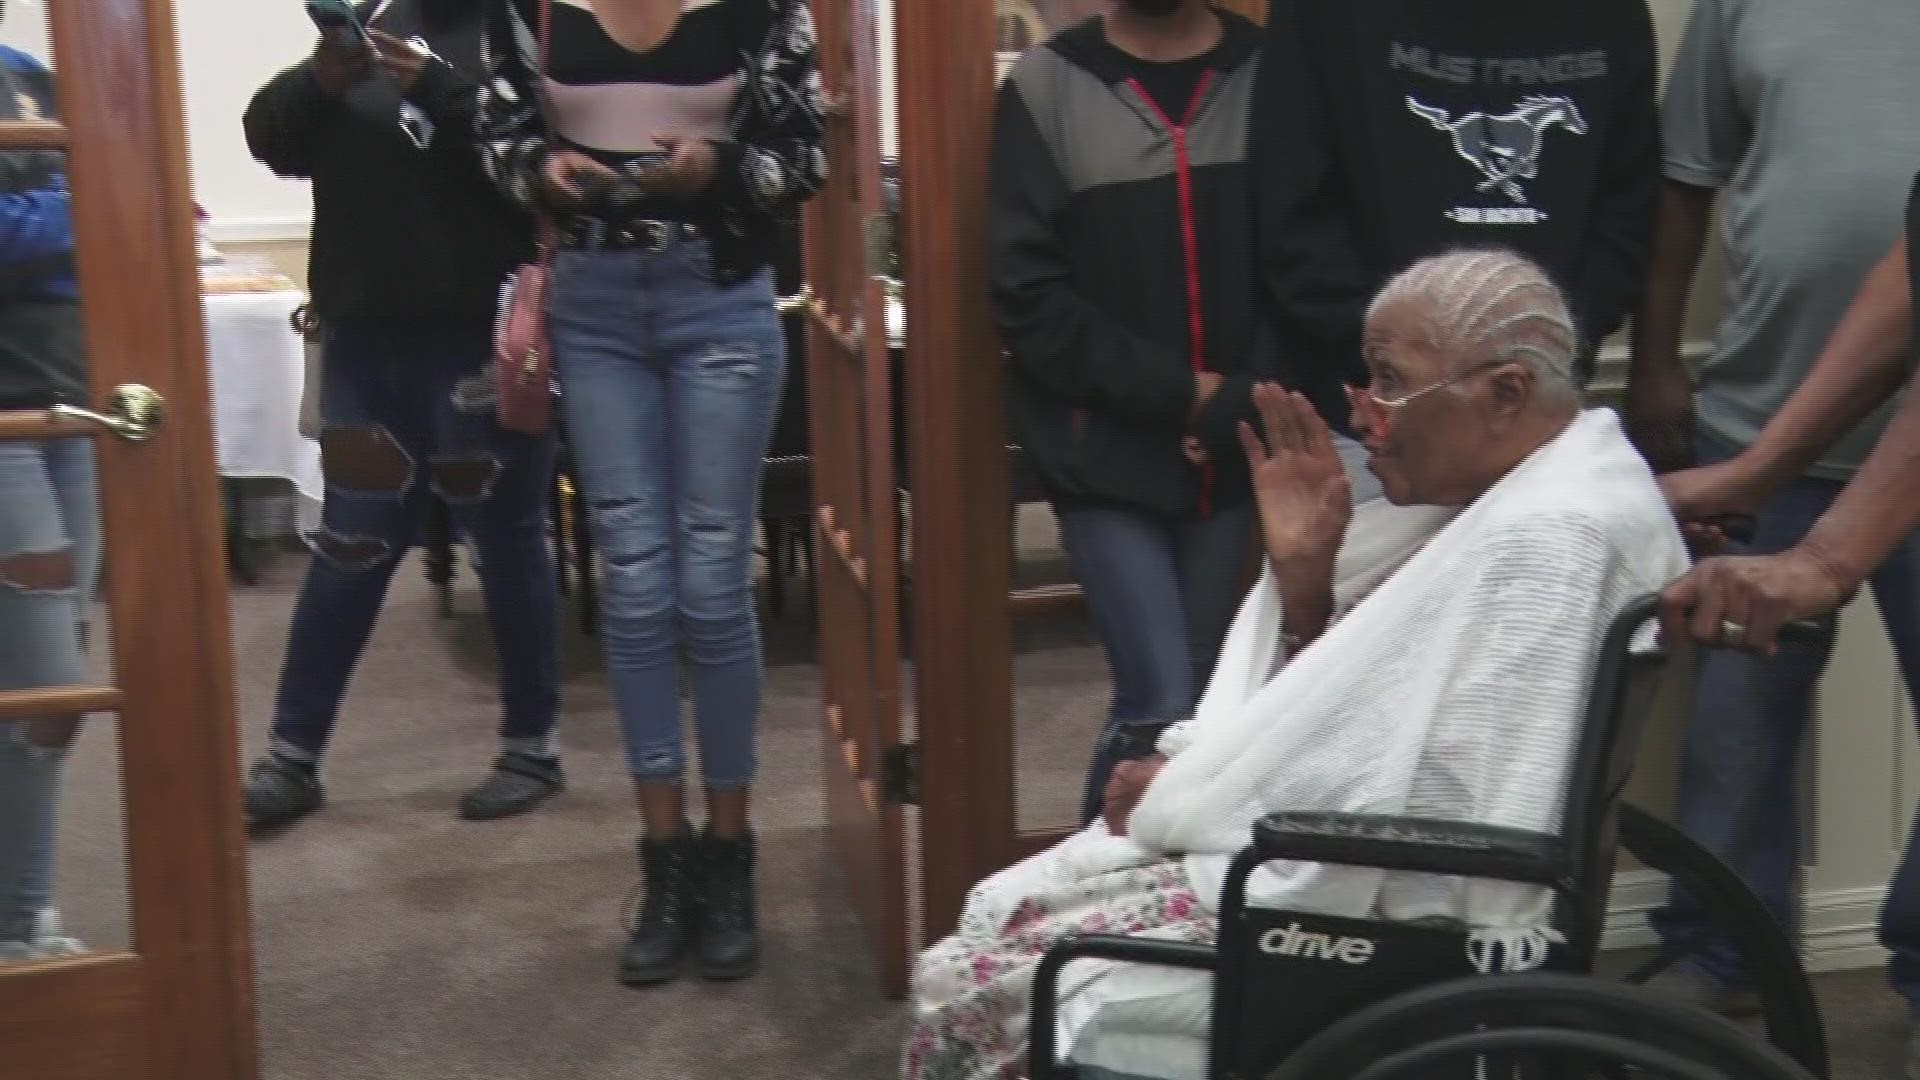 Family and friends gathered at the nursing home to surprise Thelma and celebrate her milestone birthday.